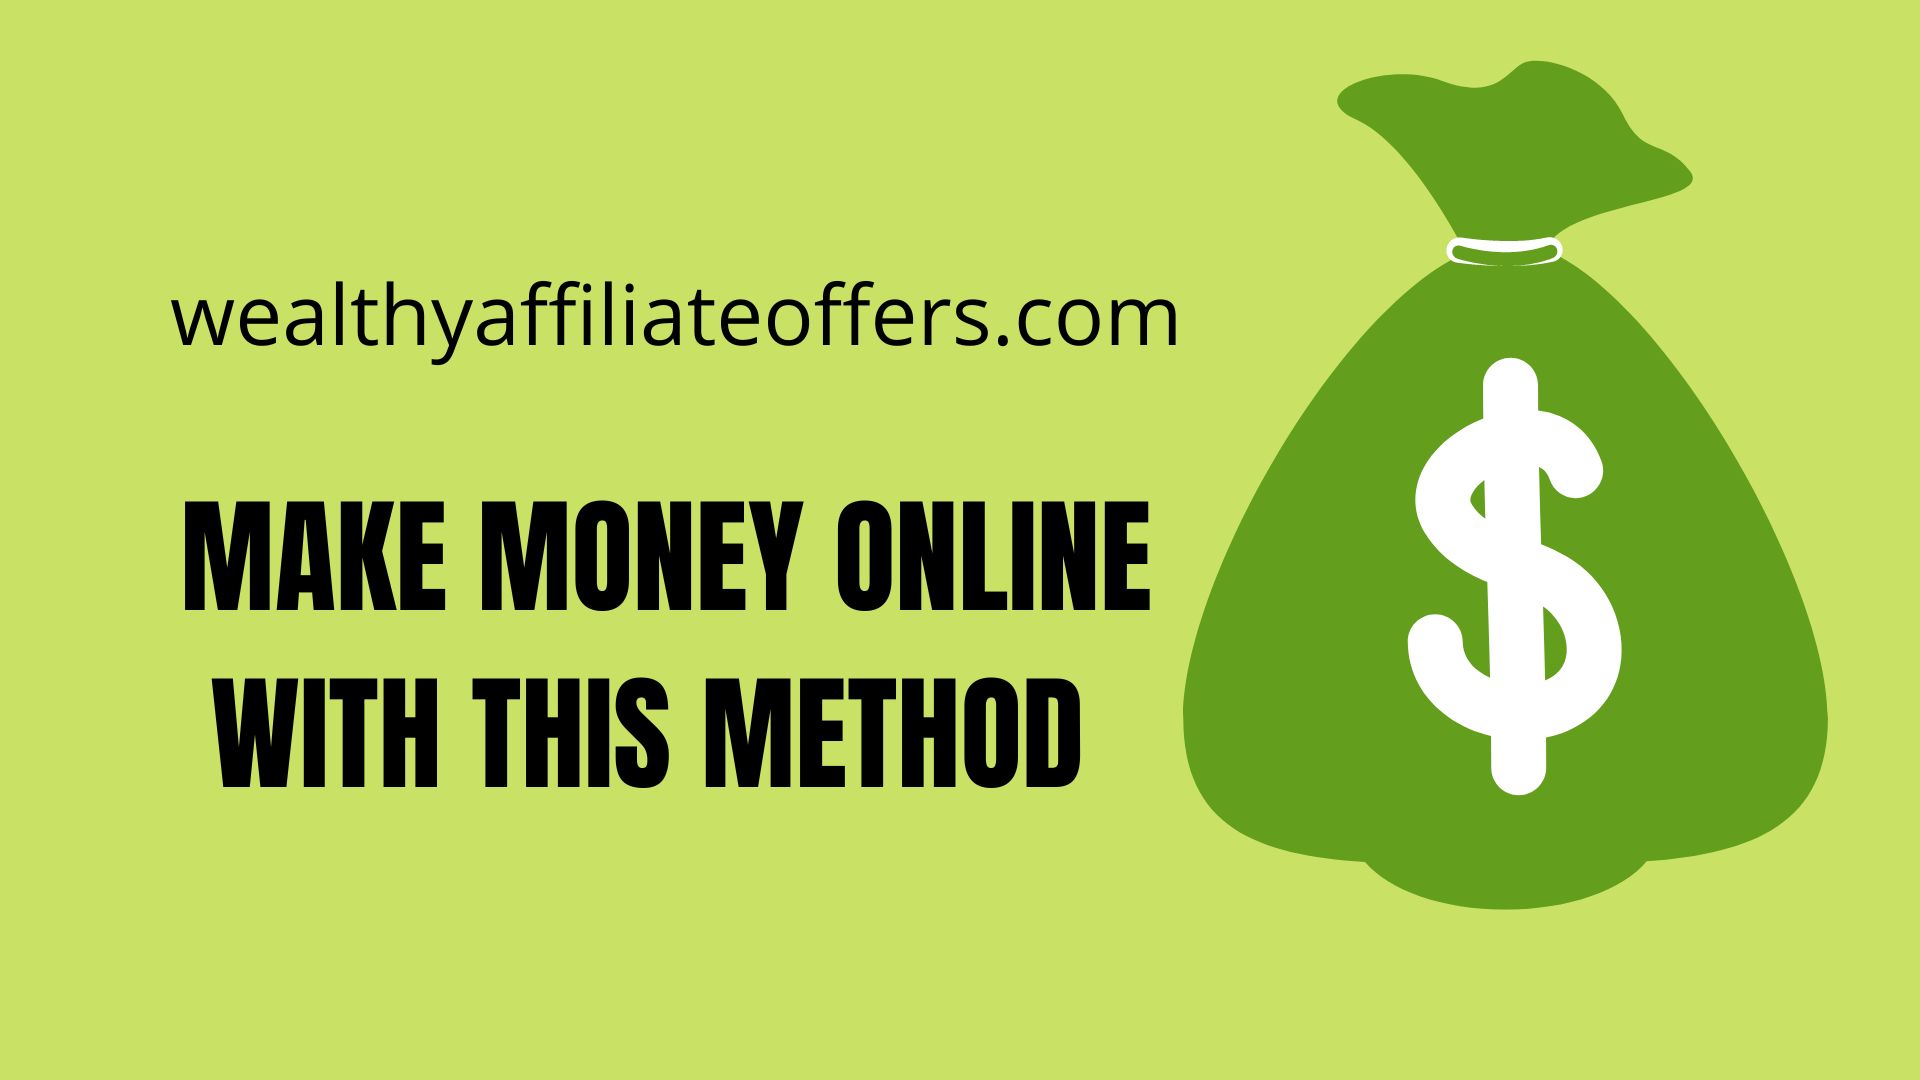 MAKE MONEY ONLINE WITH THIS METHOD